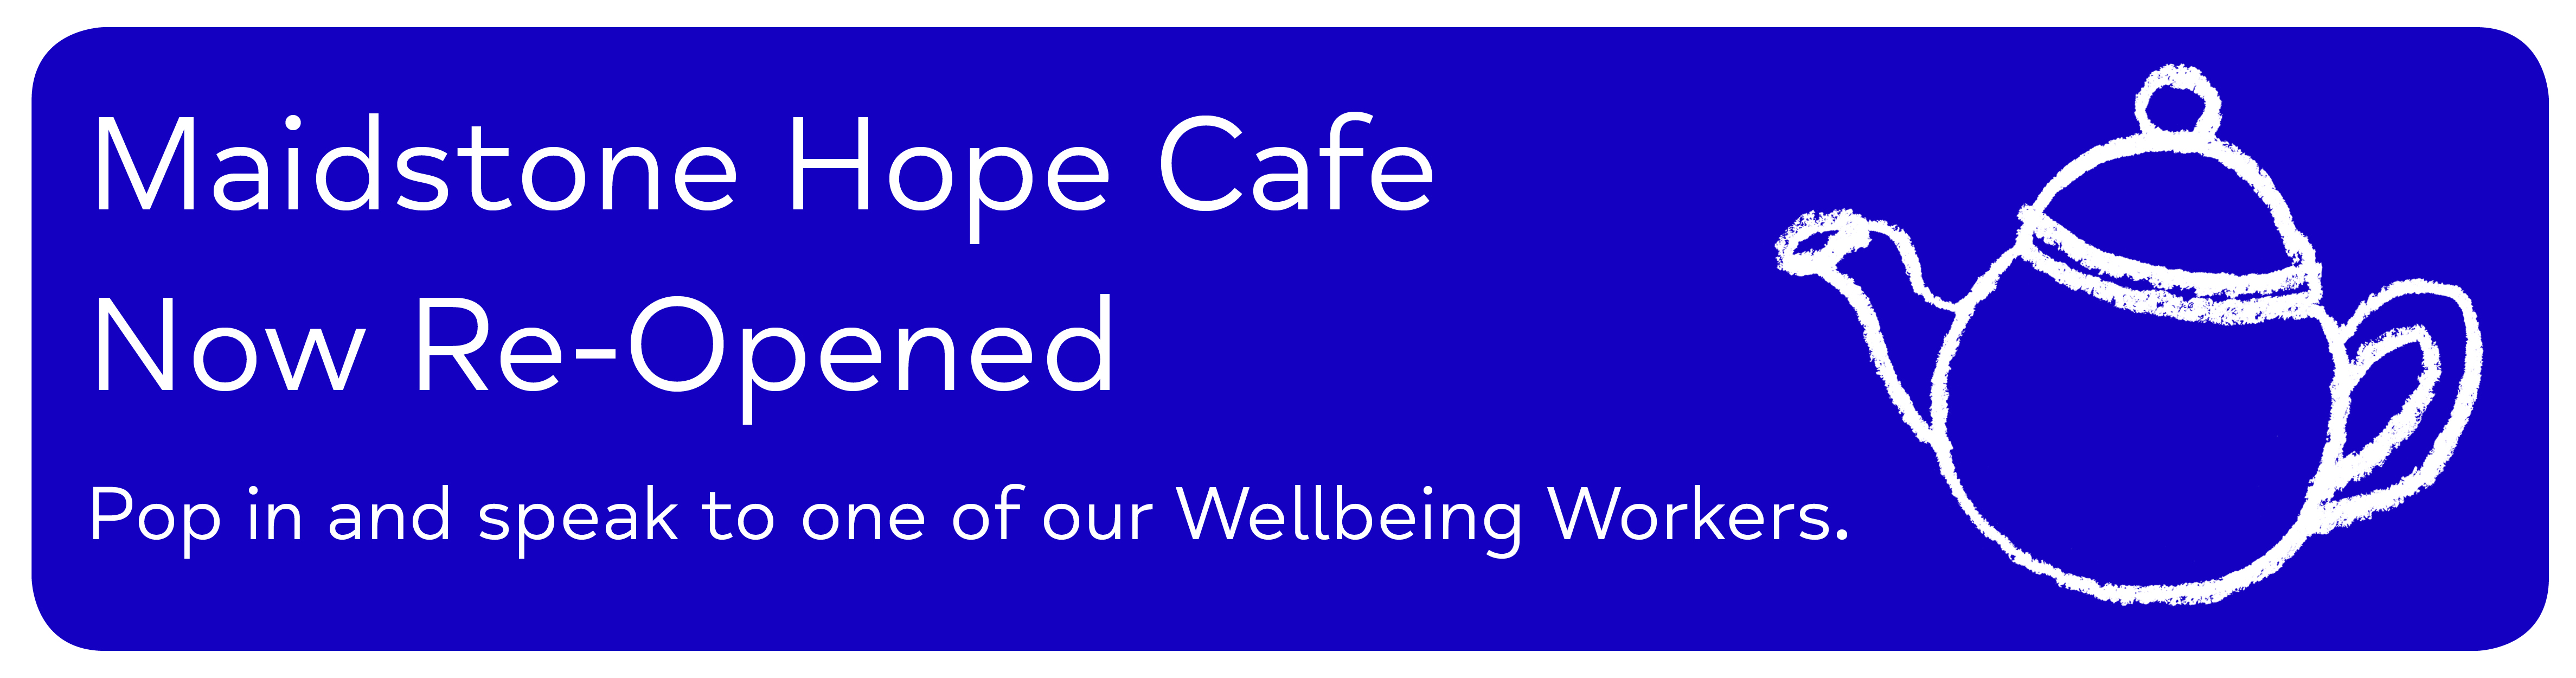 Maidstone Hope Cafe Now Re-Opened Pop in and speak to one of our Wellbeing Workers. 